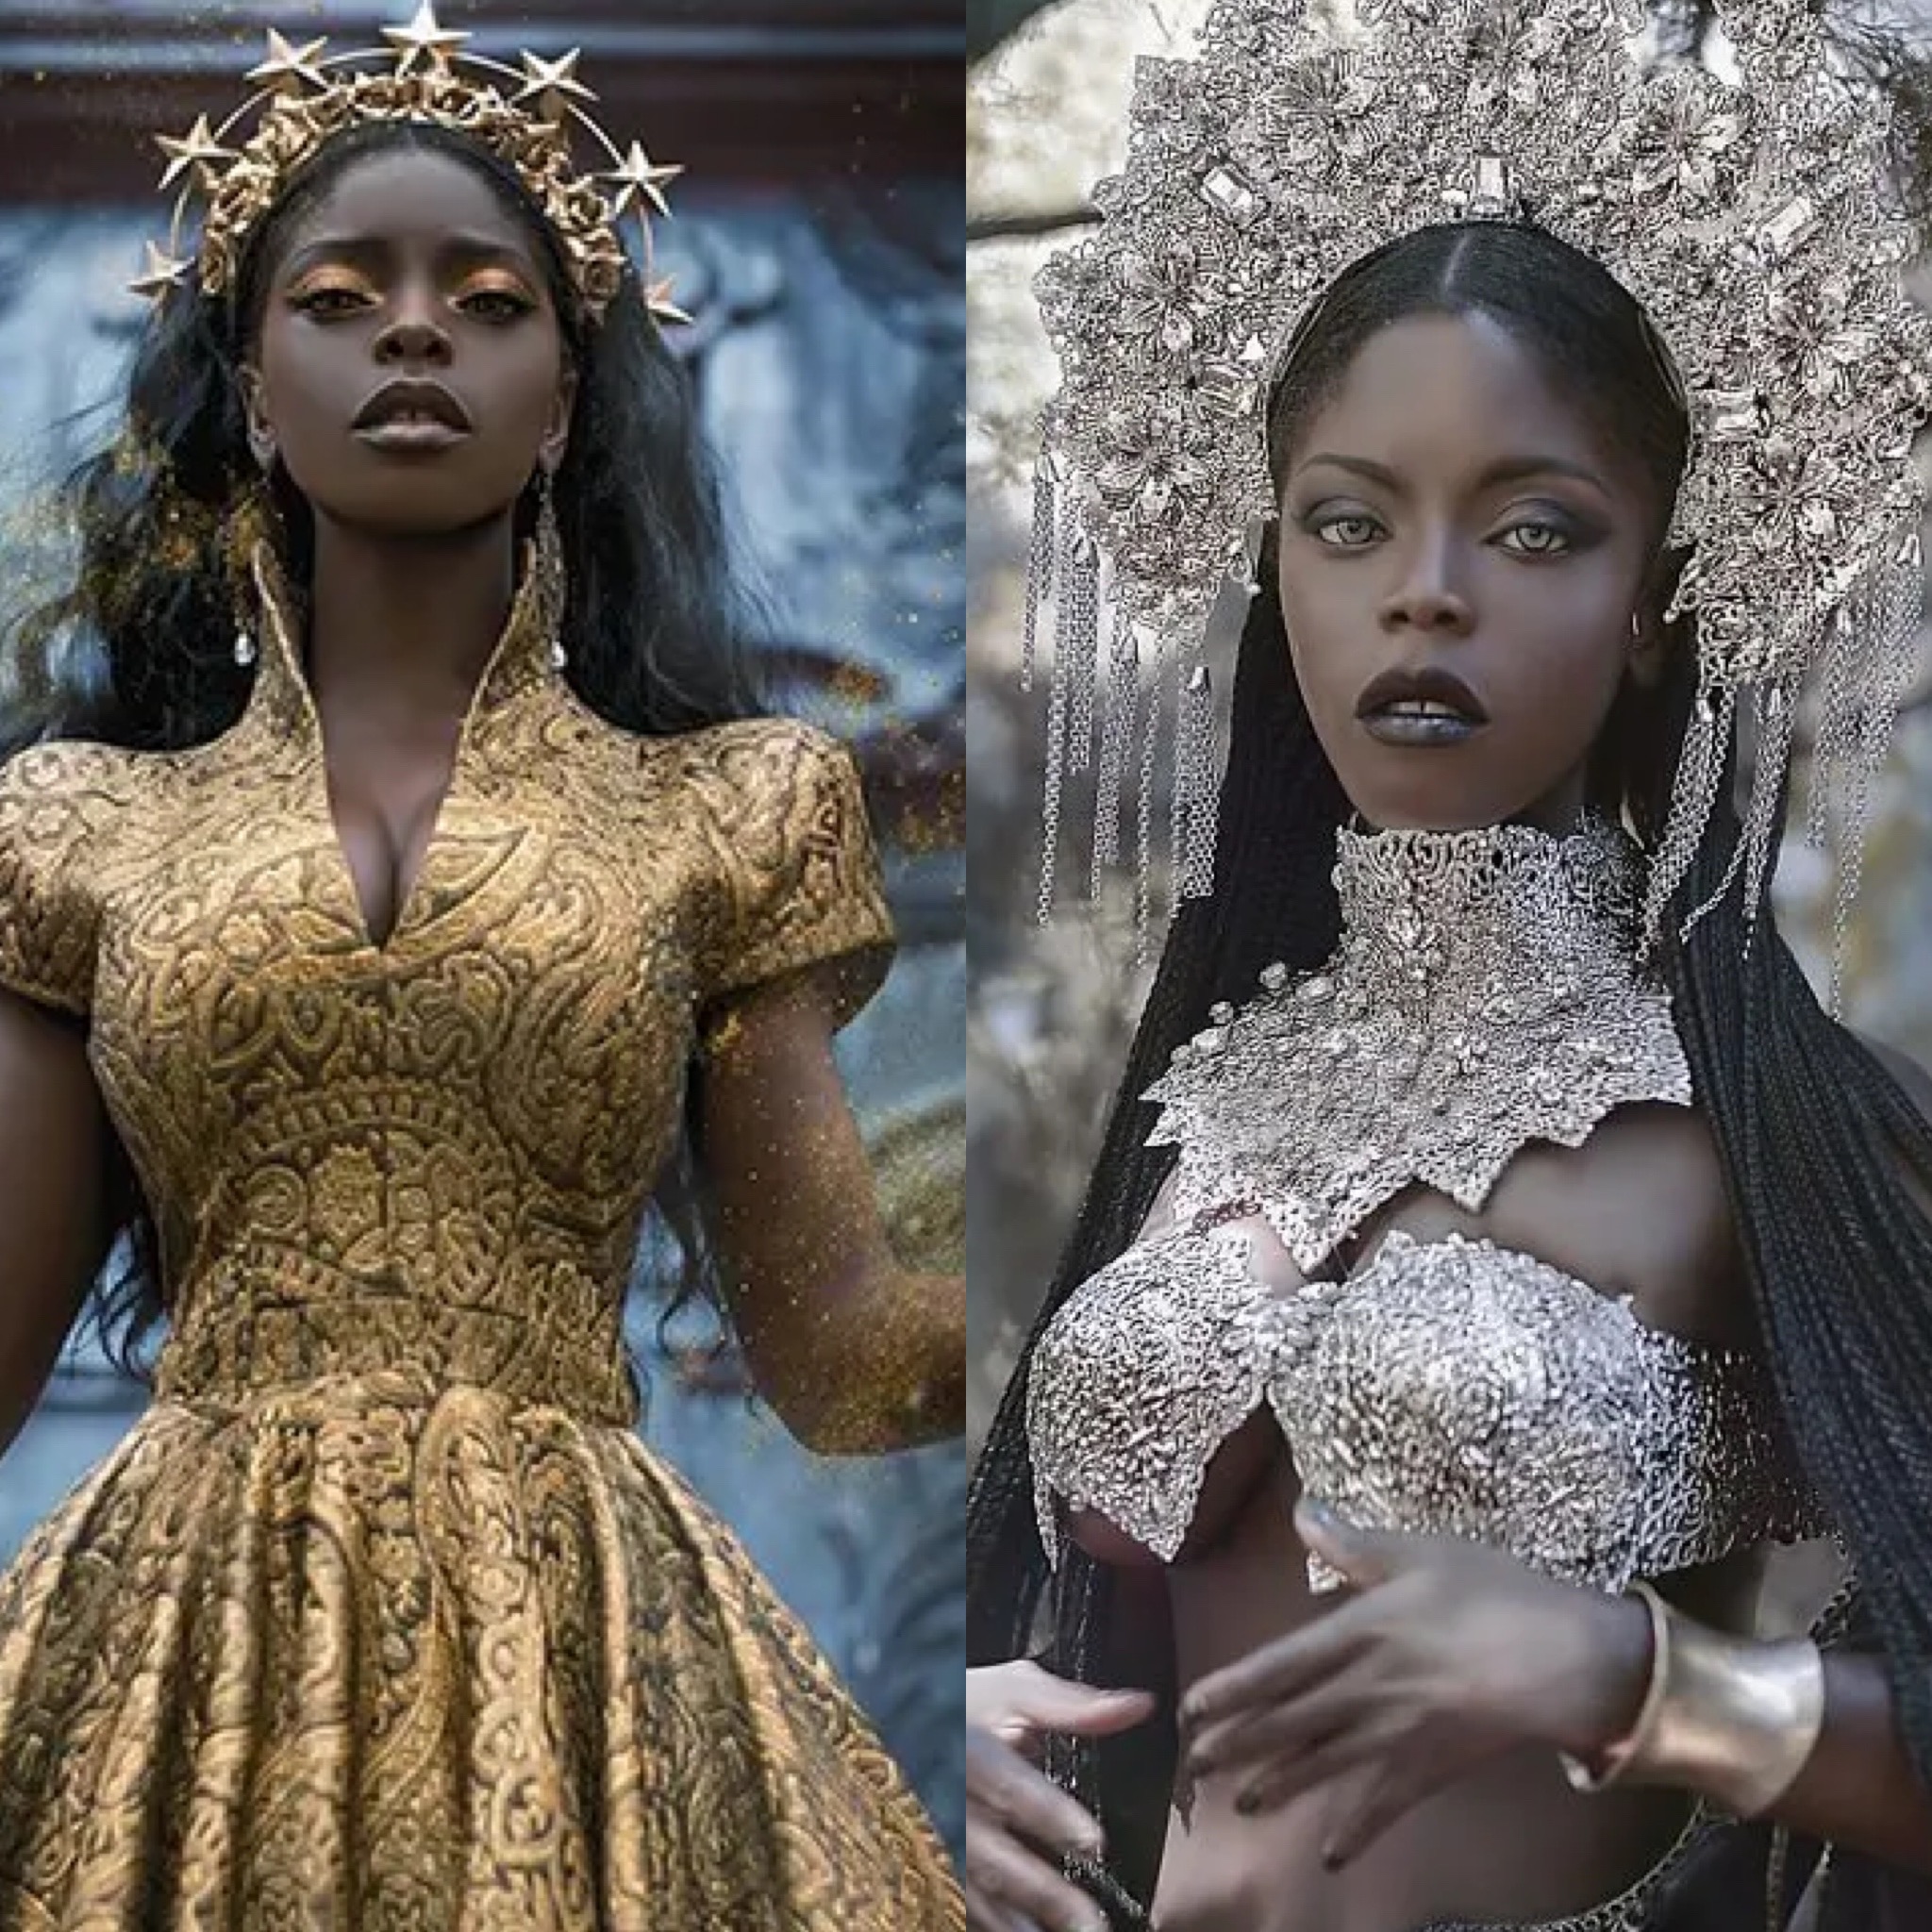 14 Stunning Images of Black Women From Fantasy Photo Shoots You Have To ...